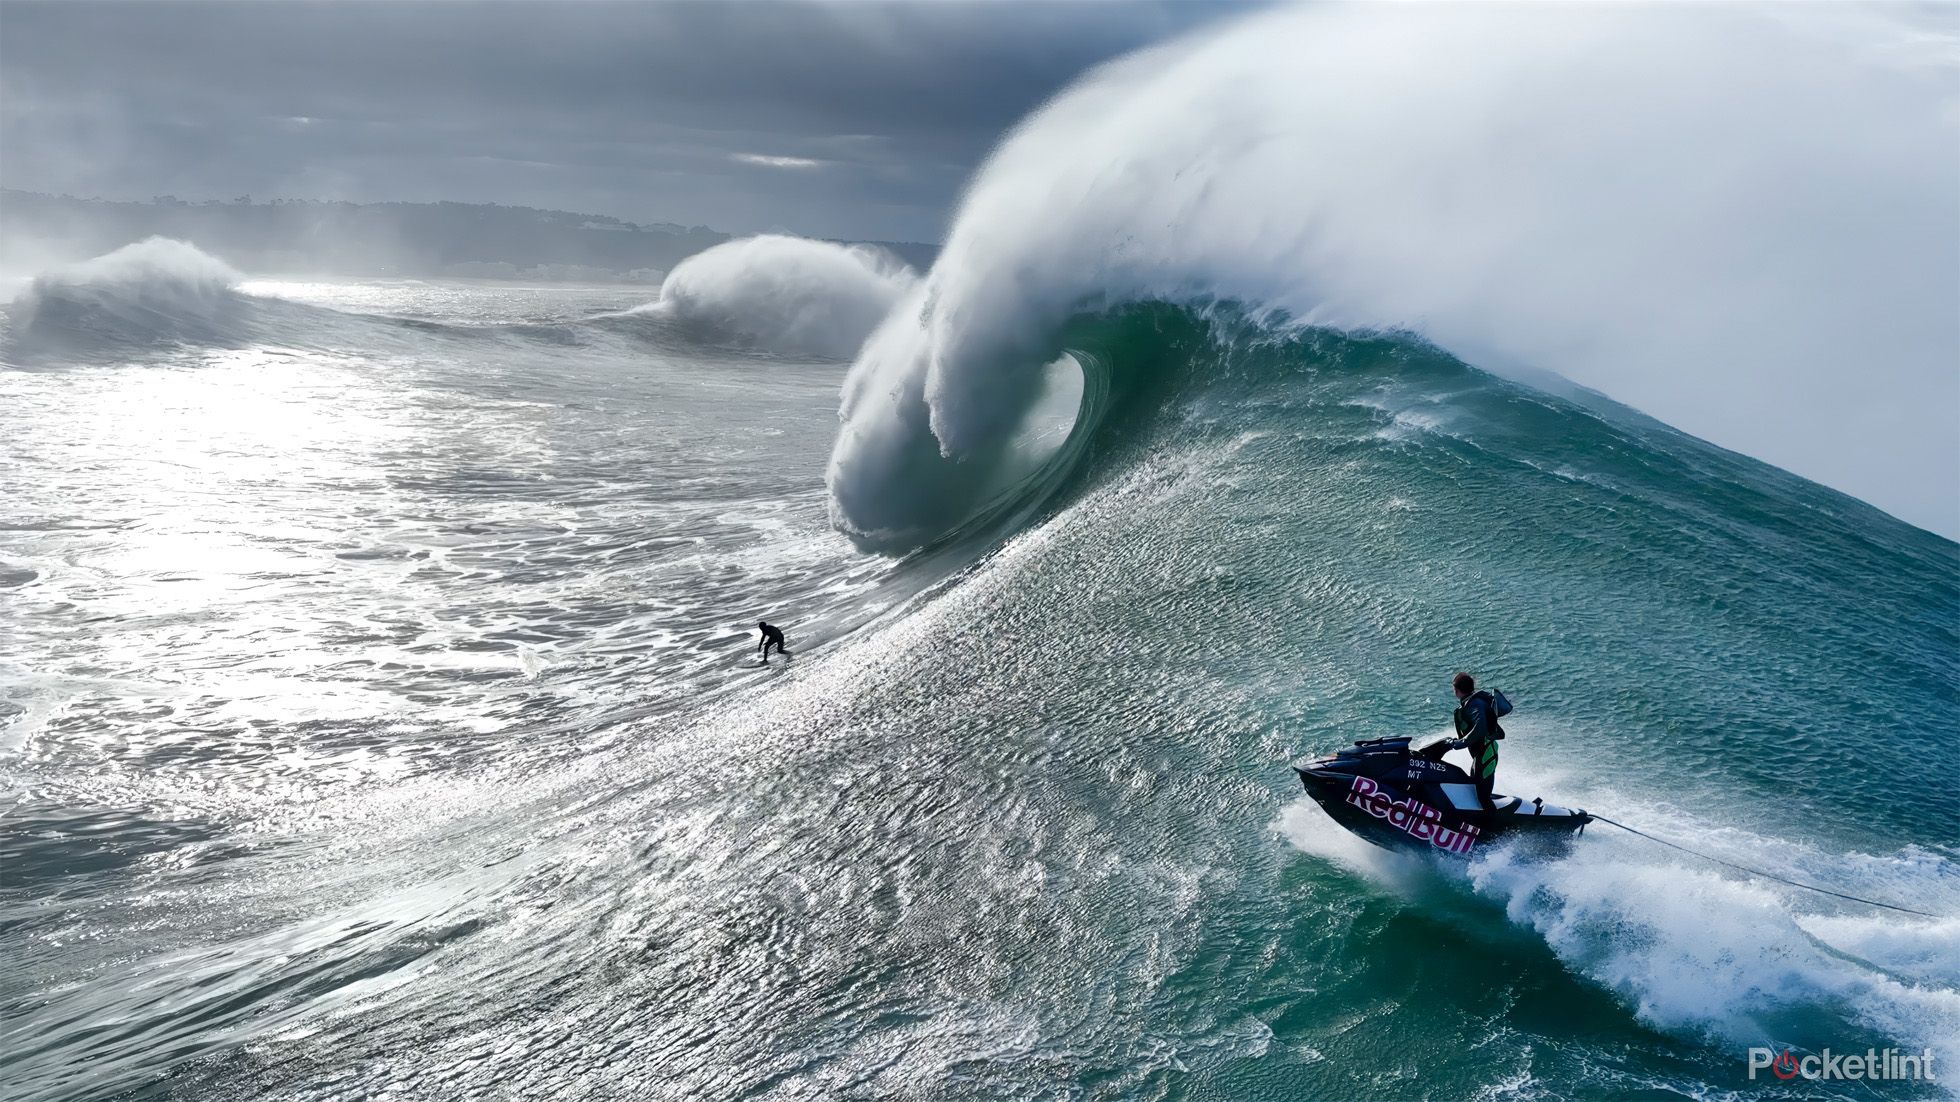 A screenshot from Apple's upcoming surfing documentary 